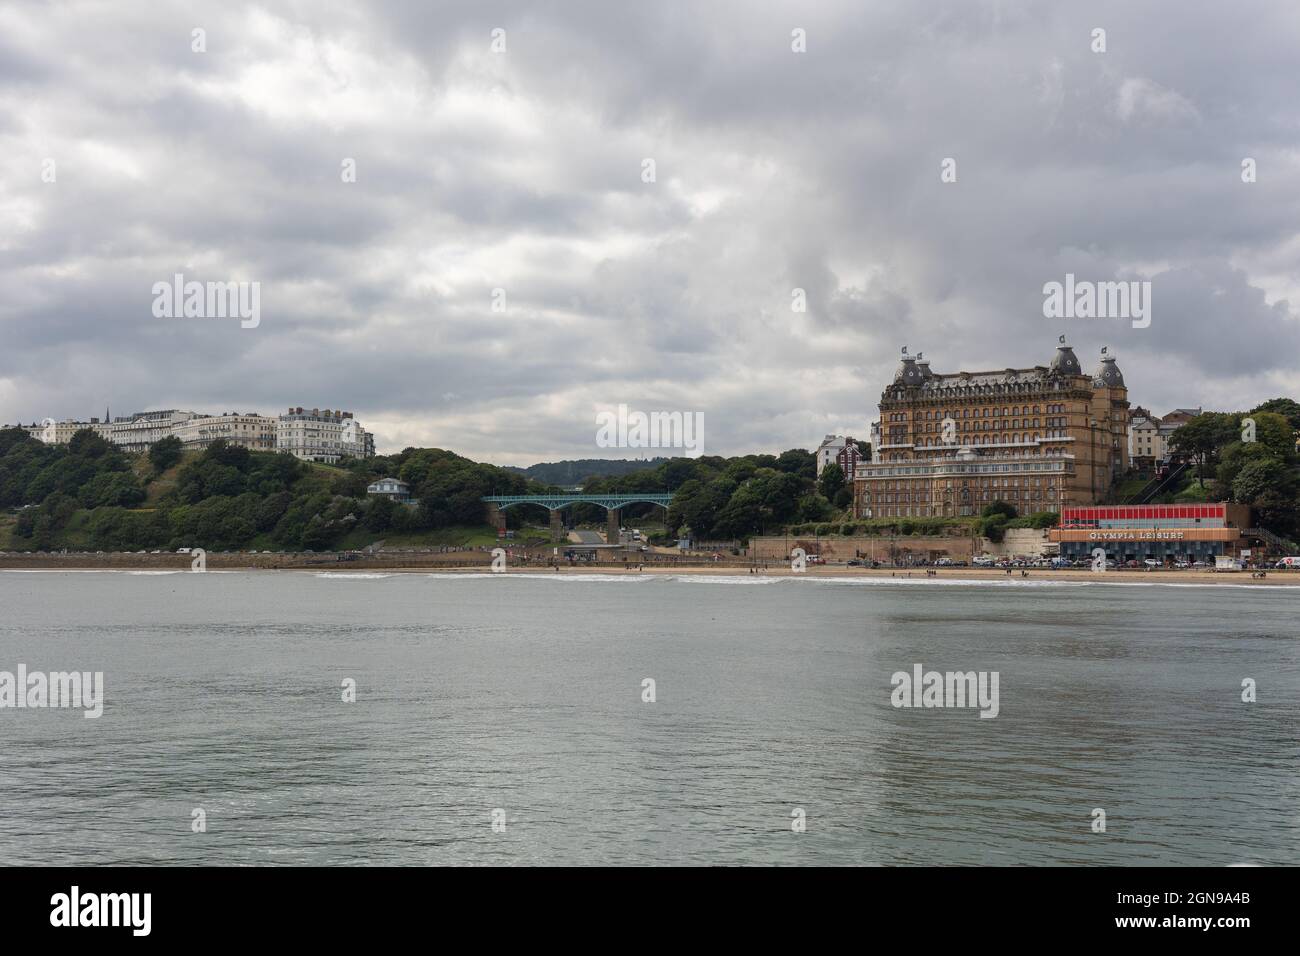 Scarborough Harbour, Looking over the bay at Victorian buildings. Stock Photo